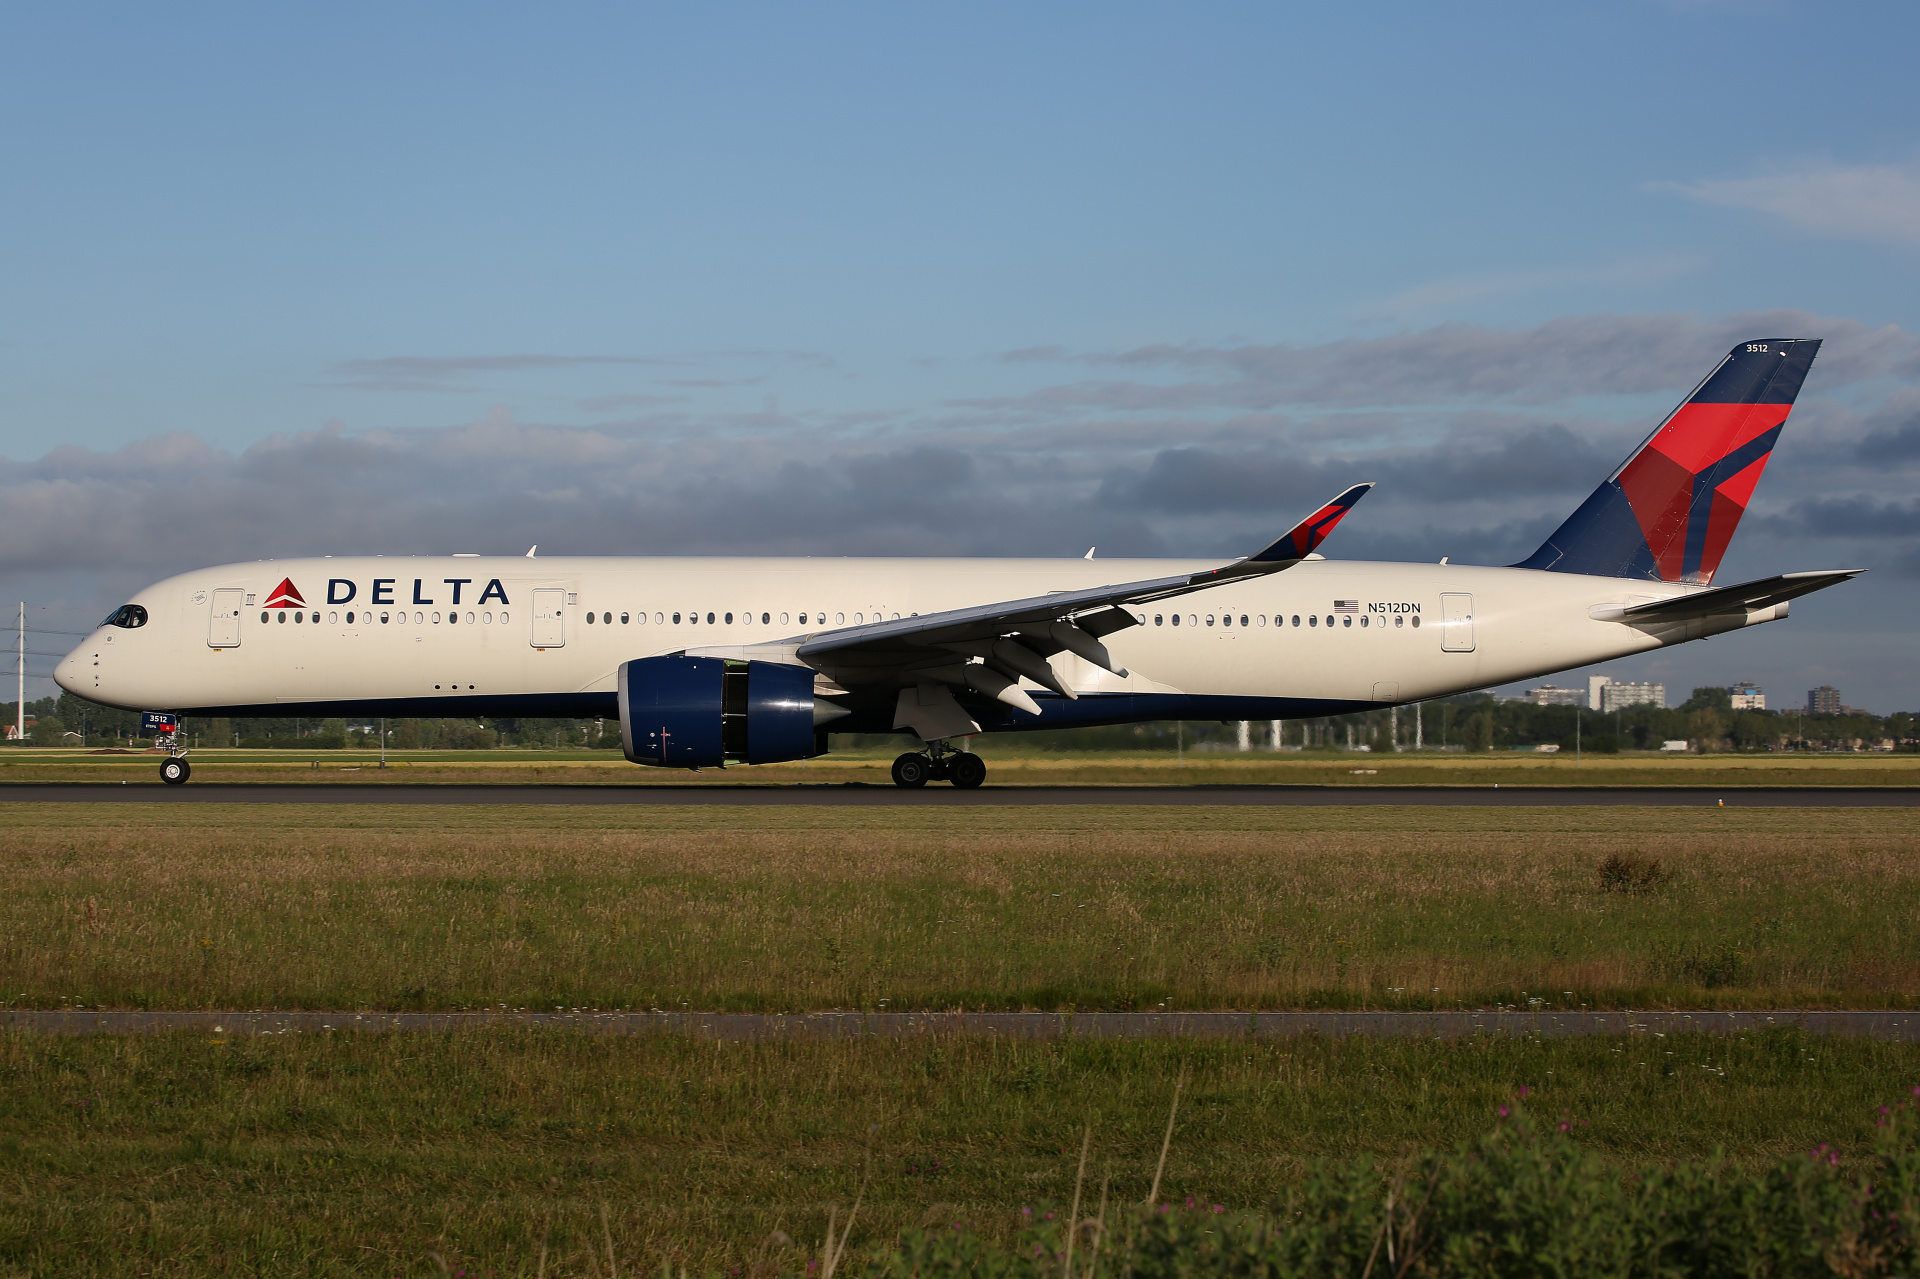 N512DN (Aircraft » Schiphol Spotting » Airbus A350-900 » Delta Airlines)